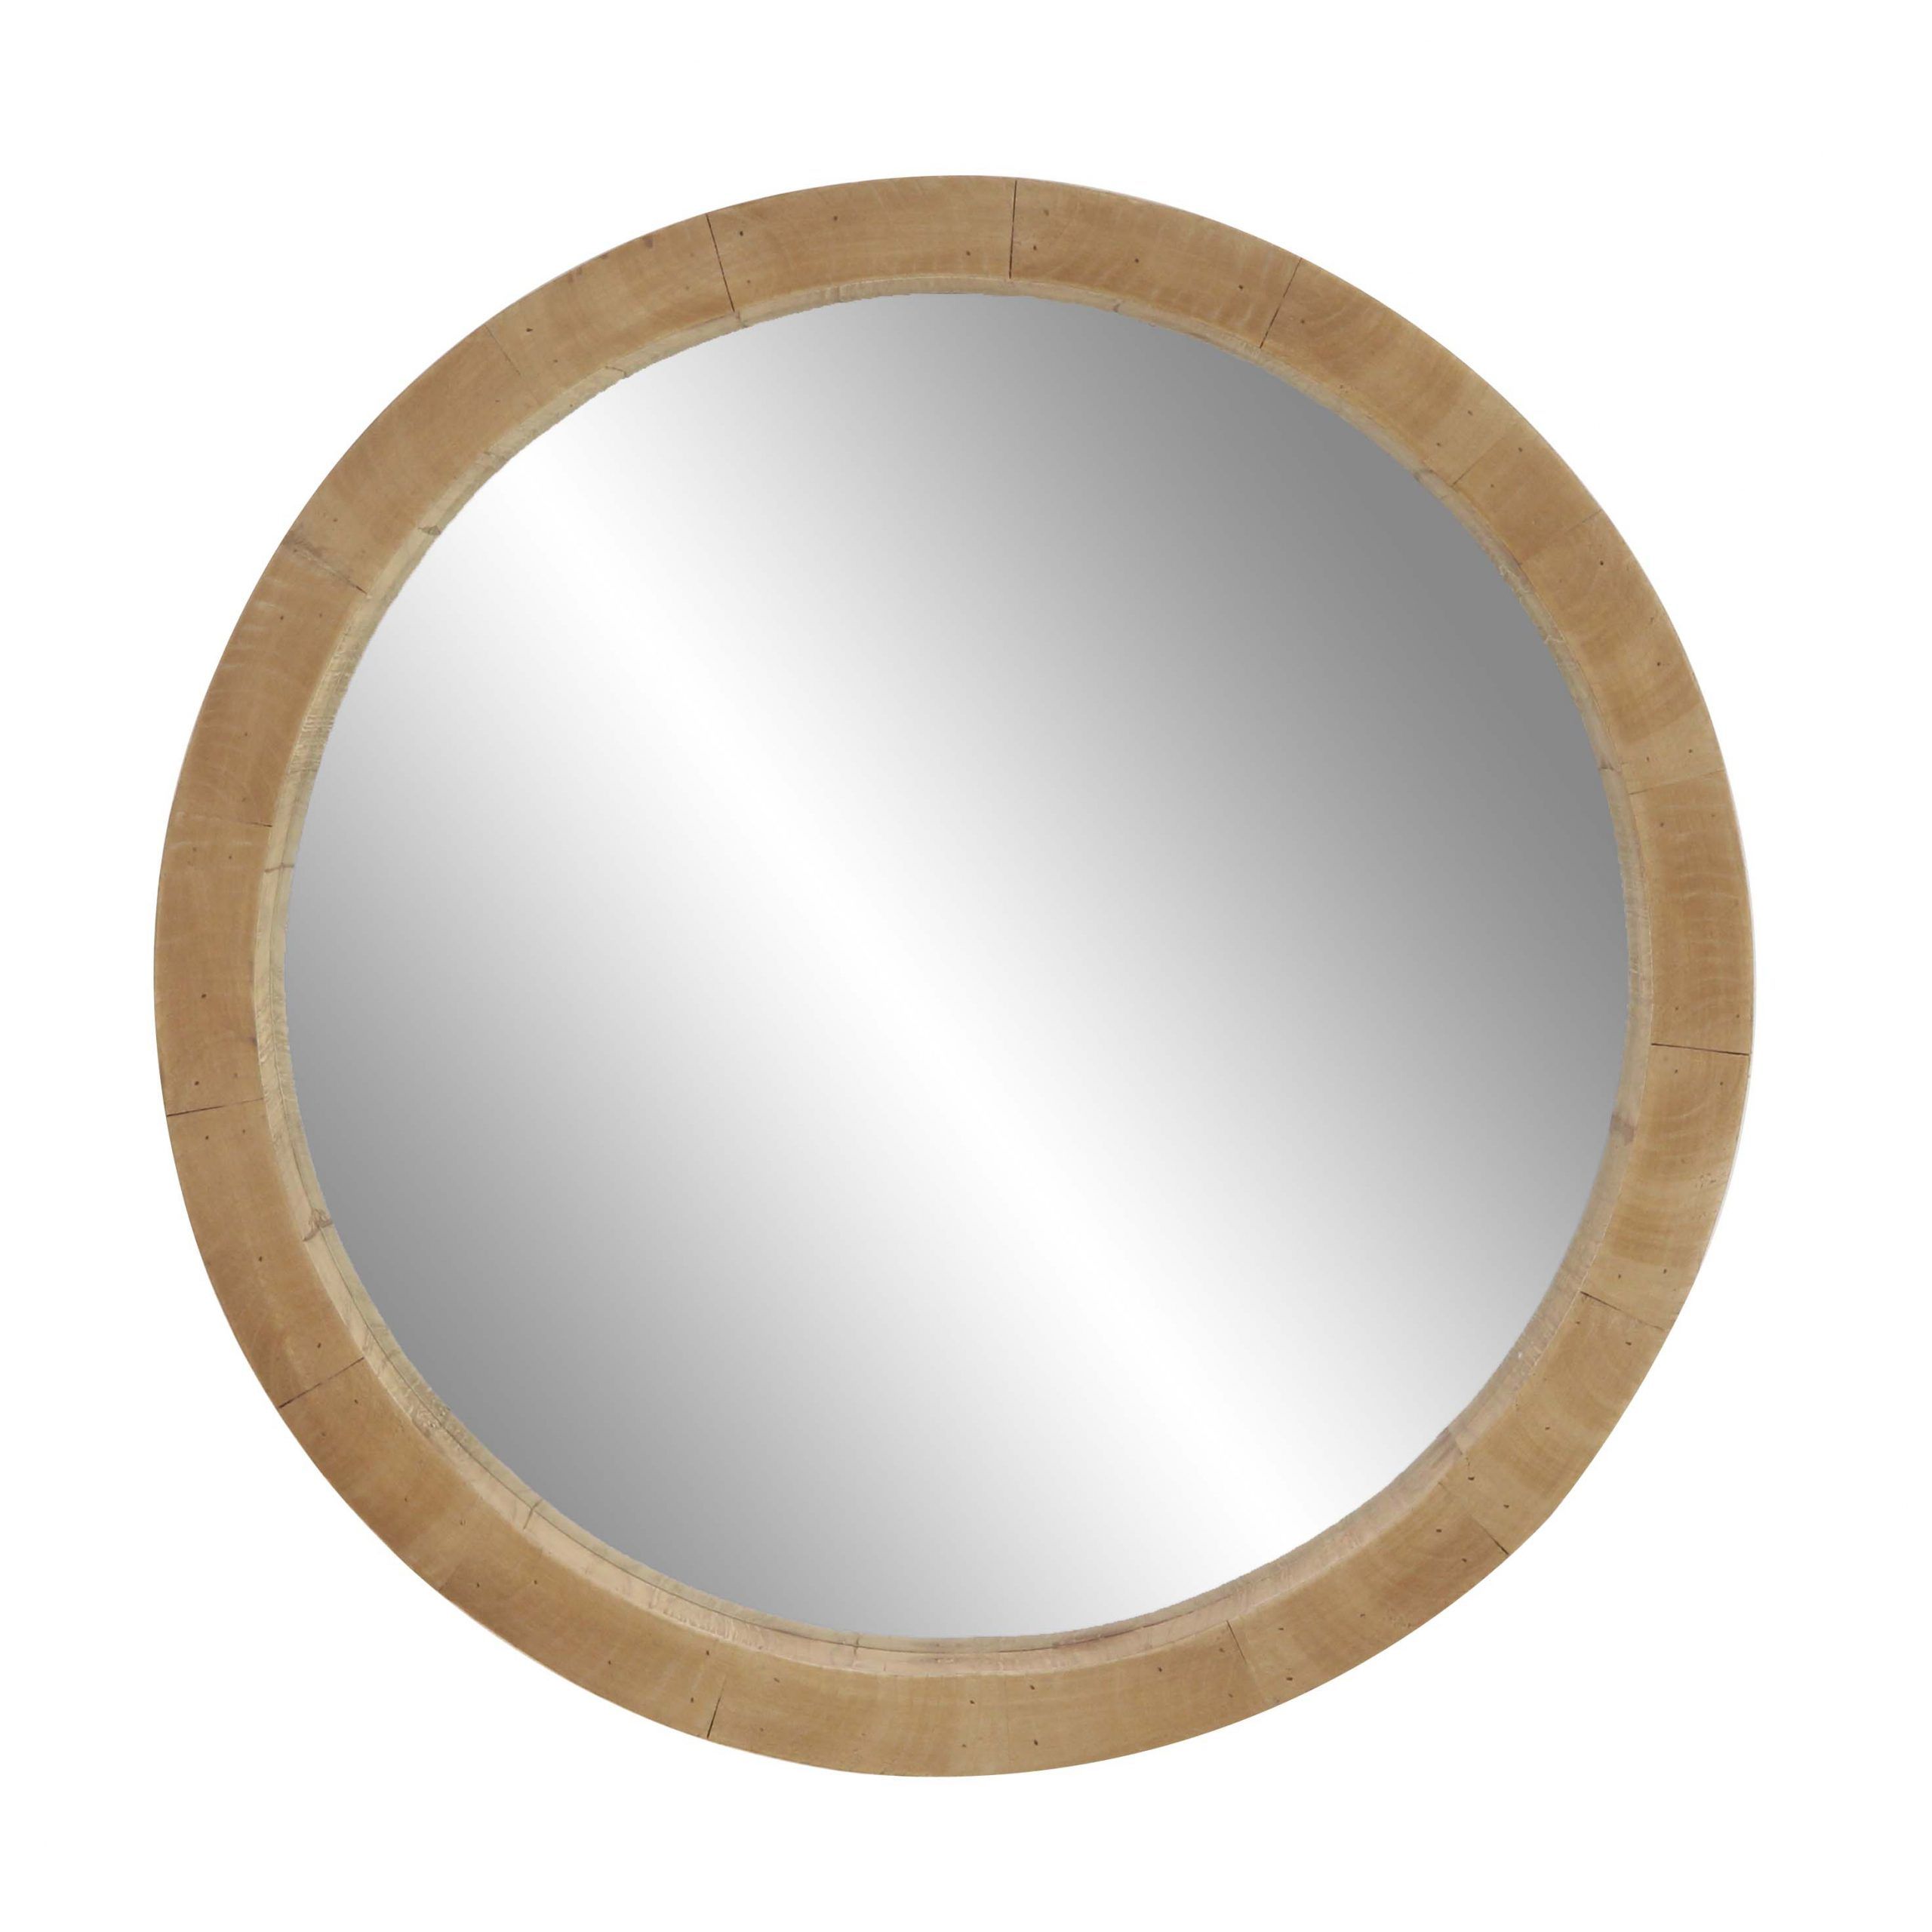 Chestnut Brown Wall Mirrors For Famous Decmode 24 Inch Rustic Wooden Round Wall Mirror, Brown – Walmart (View 14 of 15)